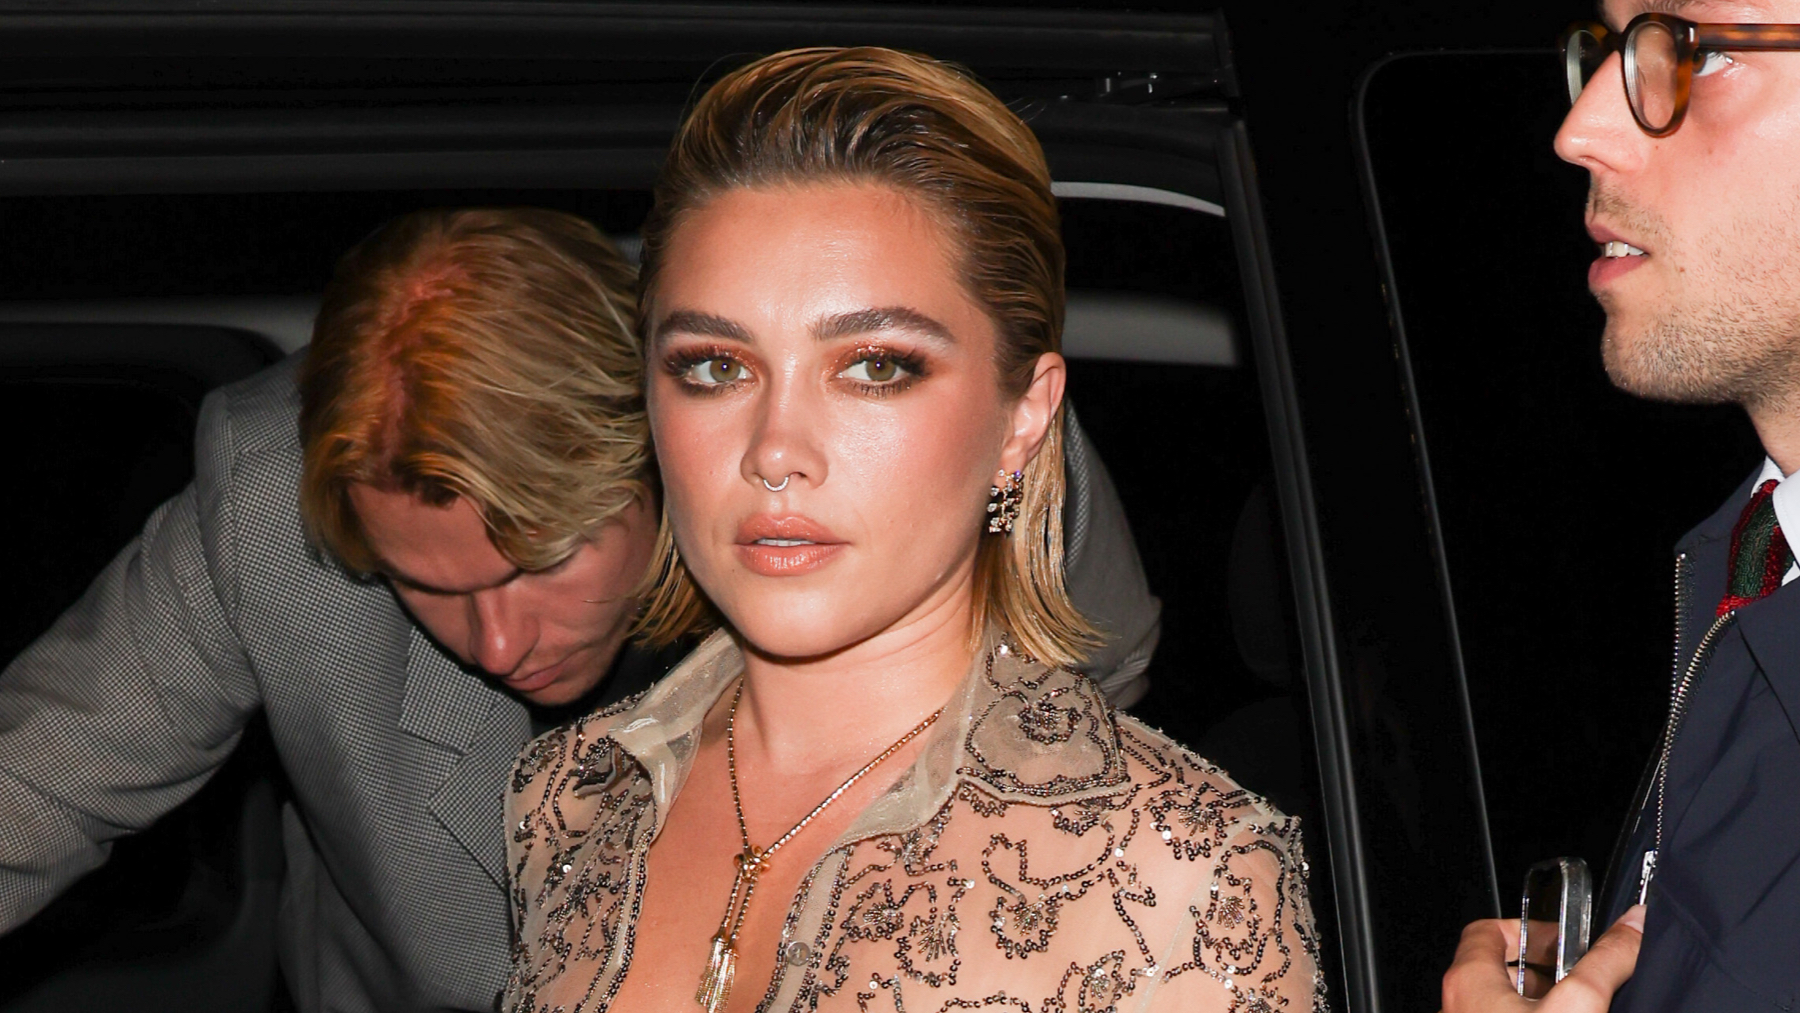 Florence Pugh assaulted on stage, joining a series of similar incidents